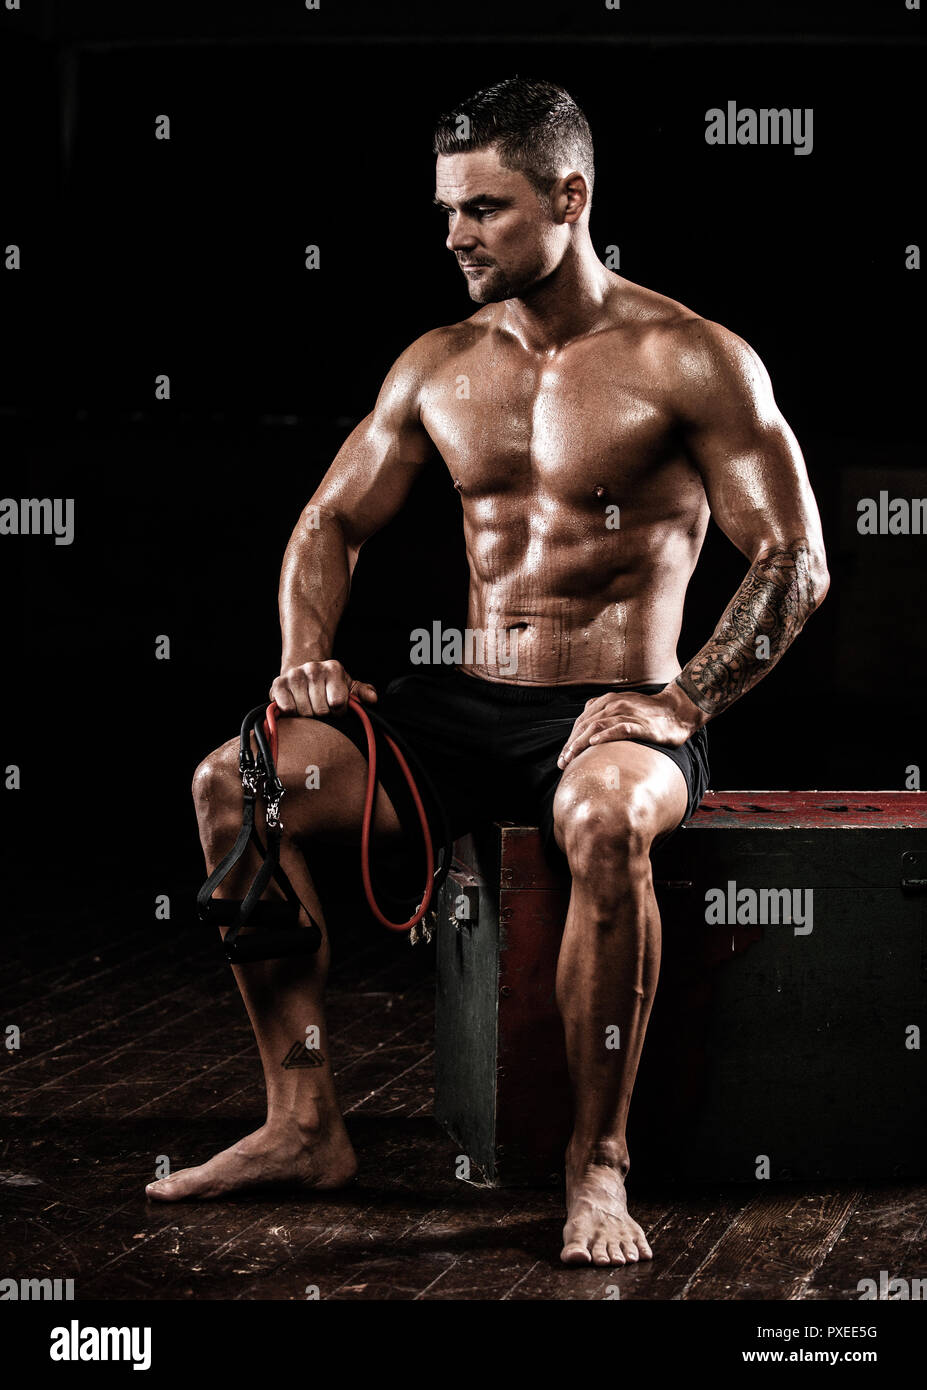 Male sitting after using resistance bands after training exercise Stock Photo